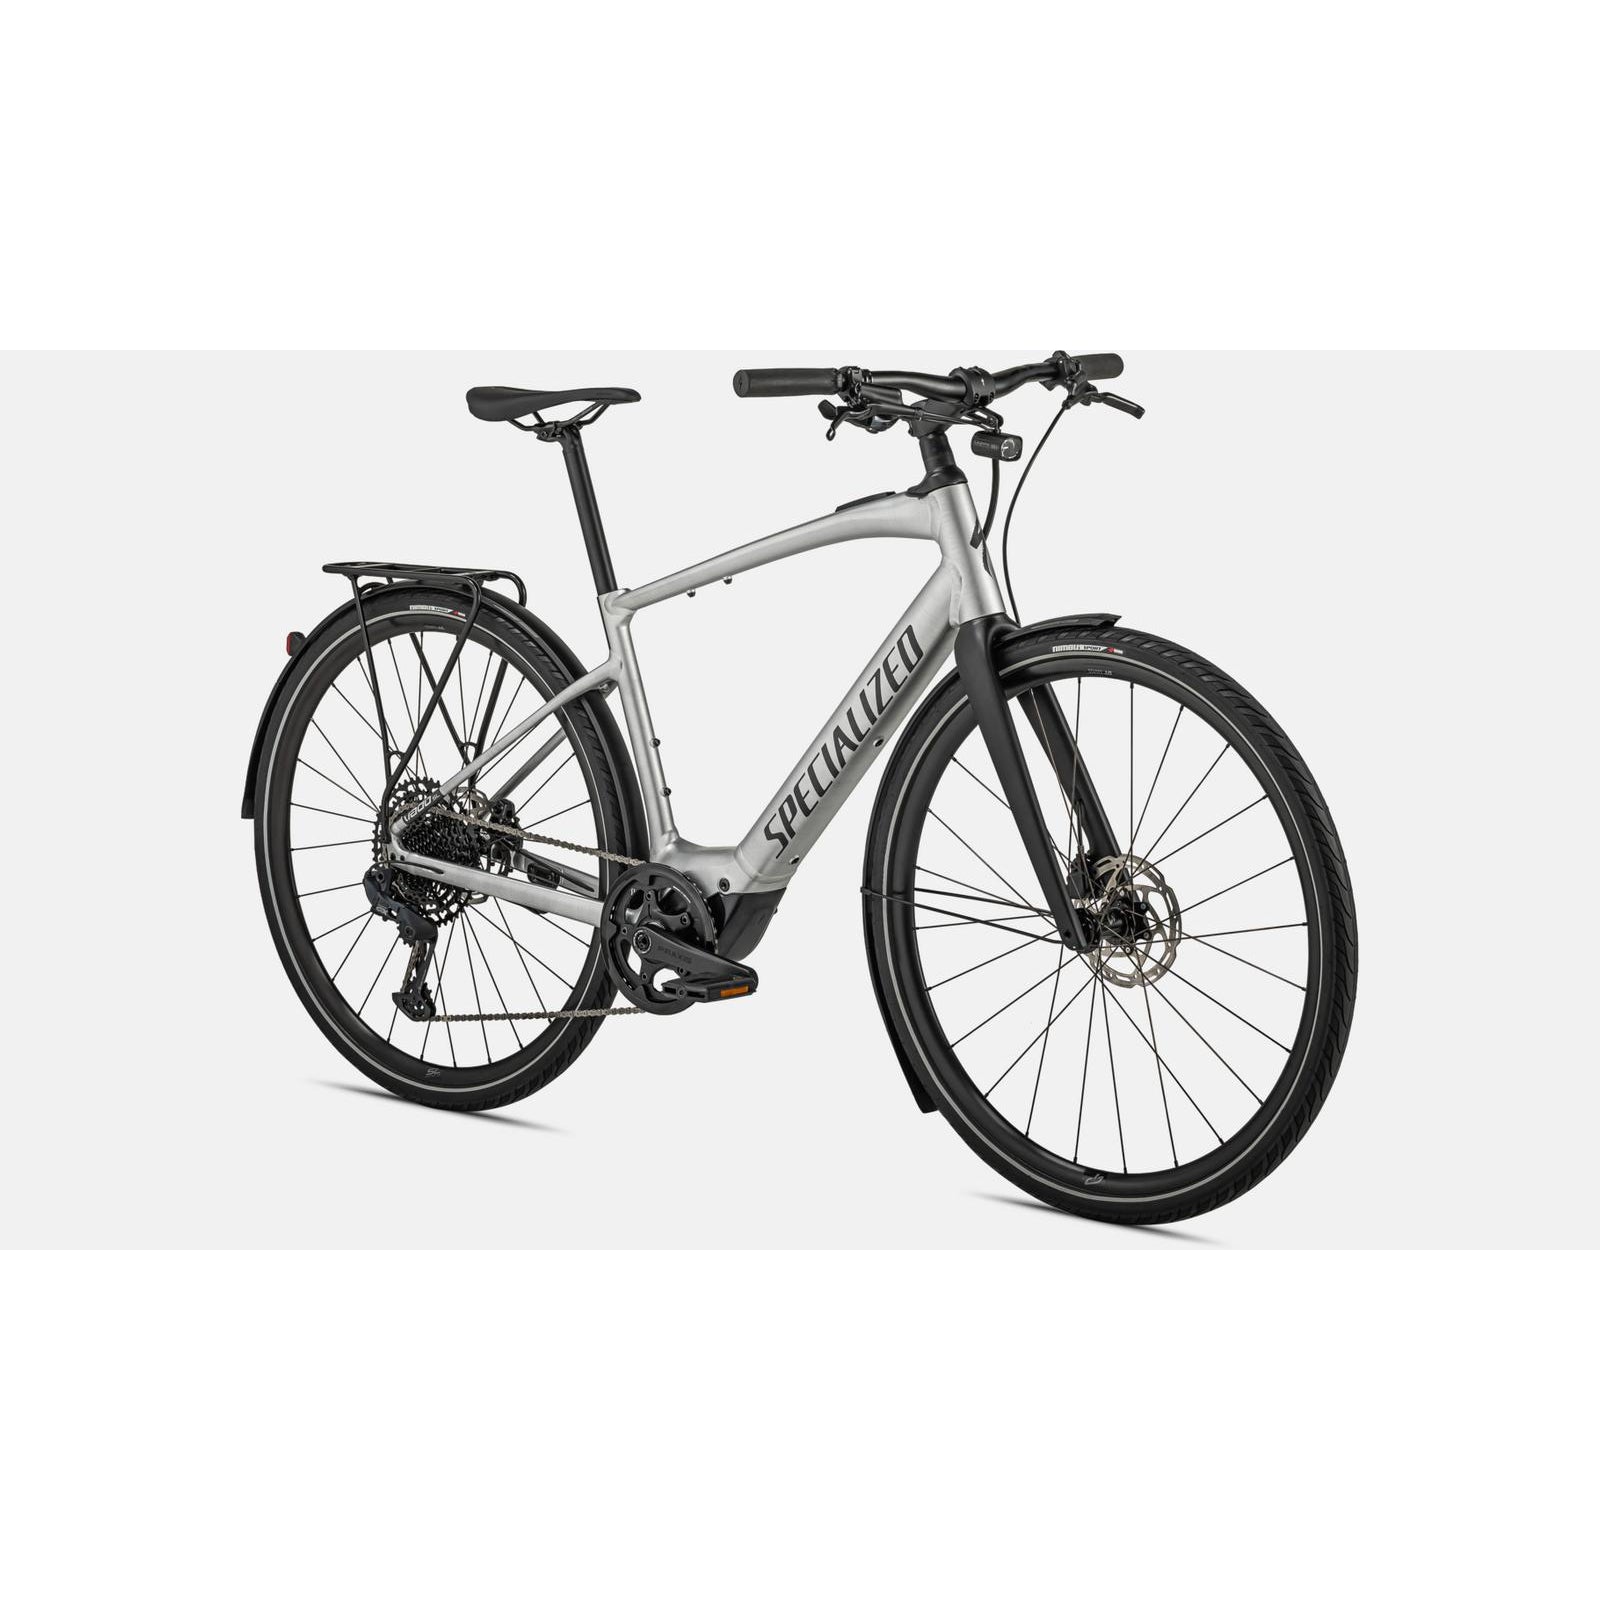 Specialized Turbo Vado SL 5.0 EQ Active Electric Bike - Bikes - Bicycle Warehouse